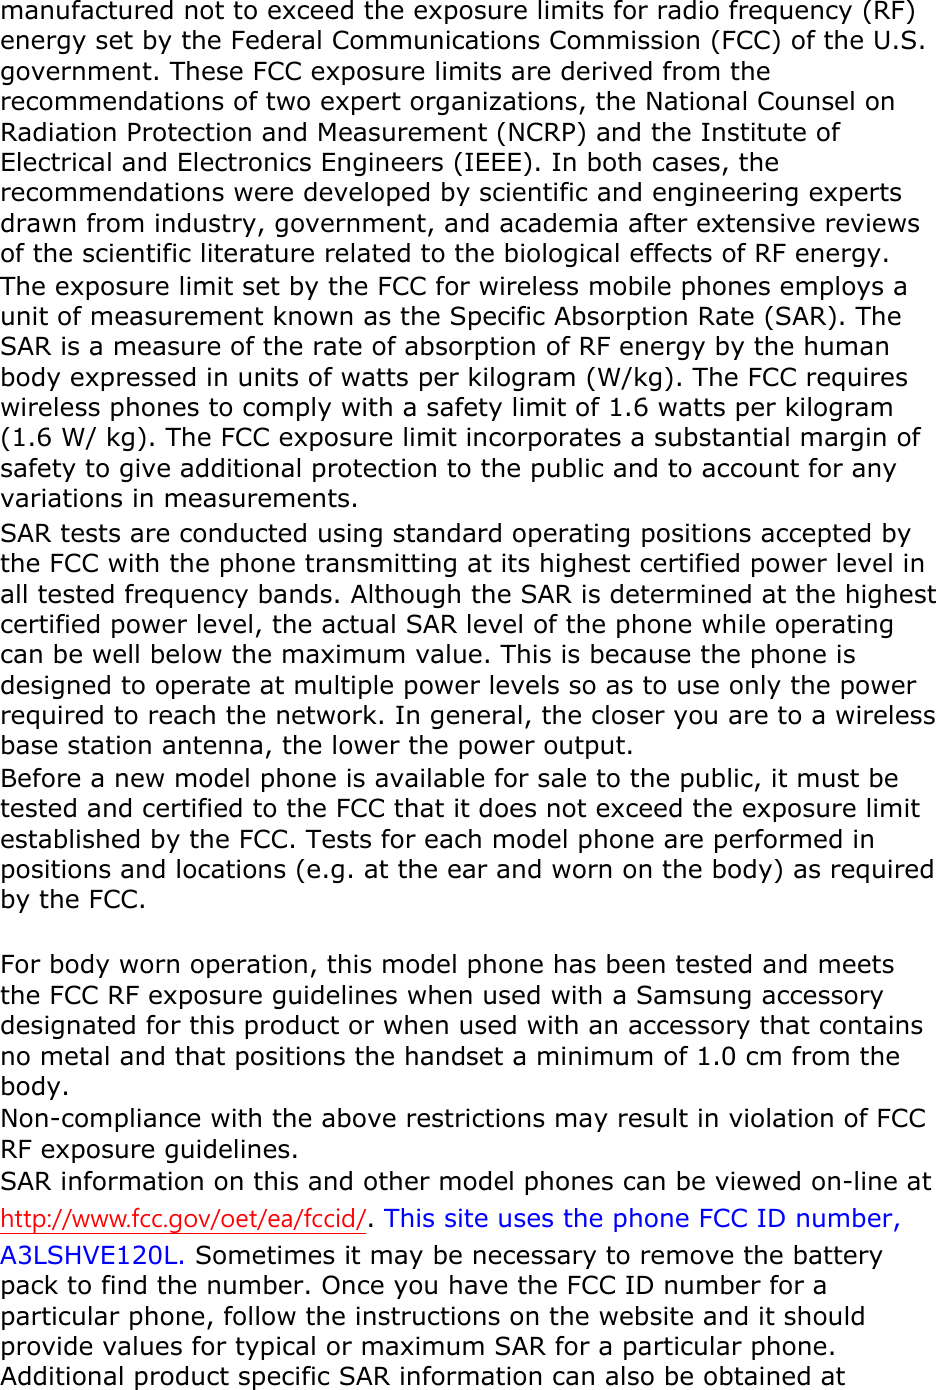 manufactured not to exceed the exposure limits for radio frequency (RF) energy set by the Federal Communications Commission (FCC) of the U.S. government. These FCC exposure limits are derived from the recommendations of two expert organizations, the National Counsel on Radiation Protection and Measurement (NCRP) and the Institute of Electrical and Electronics Engineers (IEEE). In both cases, the recommendations were developed by scientific and engineering experts drawn from industry, government, and academia after extensive reviews of the scientific literature related to the biological effects of RF energy. The exposure limit set by the FCC for wireless mobile phones employs a unit of measurement known as the Specific Absorption Rate (SAR). The SAR is a measure of the rate of absorption of RF energy by the human body expressed in units of watts per kilogram (W/kg). The FCC requires wireless phones to comply with a safety limit of 1.6 watts per kilogram (1.6 W/ kg). The FCC exposure limit incorporates a substantial margin of safety to give additional protection to the public and to account for any variations in measurements. SAR tests are conducted using standard operating positions accepted by the FCC with the phone transmitting at its highest certified power level in all tested frequency bands. Although the SAR is determined at the highest certified power level, the actual SAR level of the phone while operating can be well below the maximum value. This is because the phone is designed to operate at multiple power levels so as to use only the power required to reach the network. In general, the closer you are to a wireless base station antenna, the lower the power output. Before a new model phone is available for sale to the public, it must be tested and certified to the FCC that it does not exceed the exposure limit established by the FCC. Tests for each model phone are performed in positions and locations (e.g. at the ear and worn on the body) as required by the FCC.      For body worn operation, this model phone has been tested and meets the FCC RF exposure guidelines when used with a Samsung accessory designated for this product or when used with an accessory that contains no metal and that positions the handset a minimum of 1.0 cm from the body.  Non-compliance with the above restrictions may result in violation of FCC RF exposure guidelines. SAR information on this and other model phones can be viewed on-line at http://www.fcc.gov/oet/ea/fccid/. This site uses the phone FCC ID number, A3LSHVE120L. Sometimes it may be necessary to remove the battery pack to find the number. Once you have the FCC ID number for a particular phone, follow the instructions on the website and it should provide values for typical or maximum SAR for a particular phone. Additional product specific SAR information can also be obtained at 